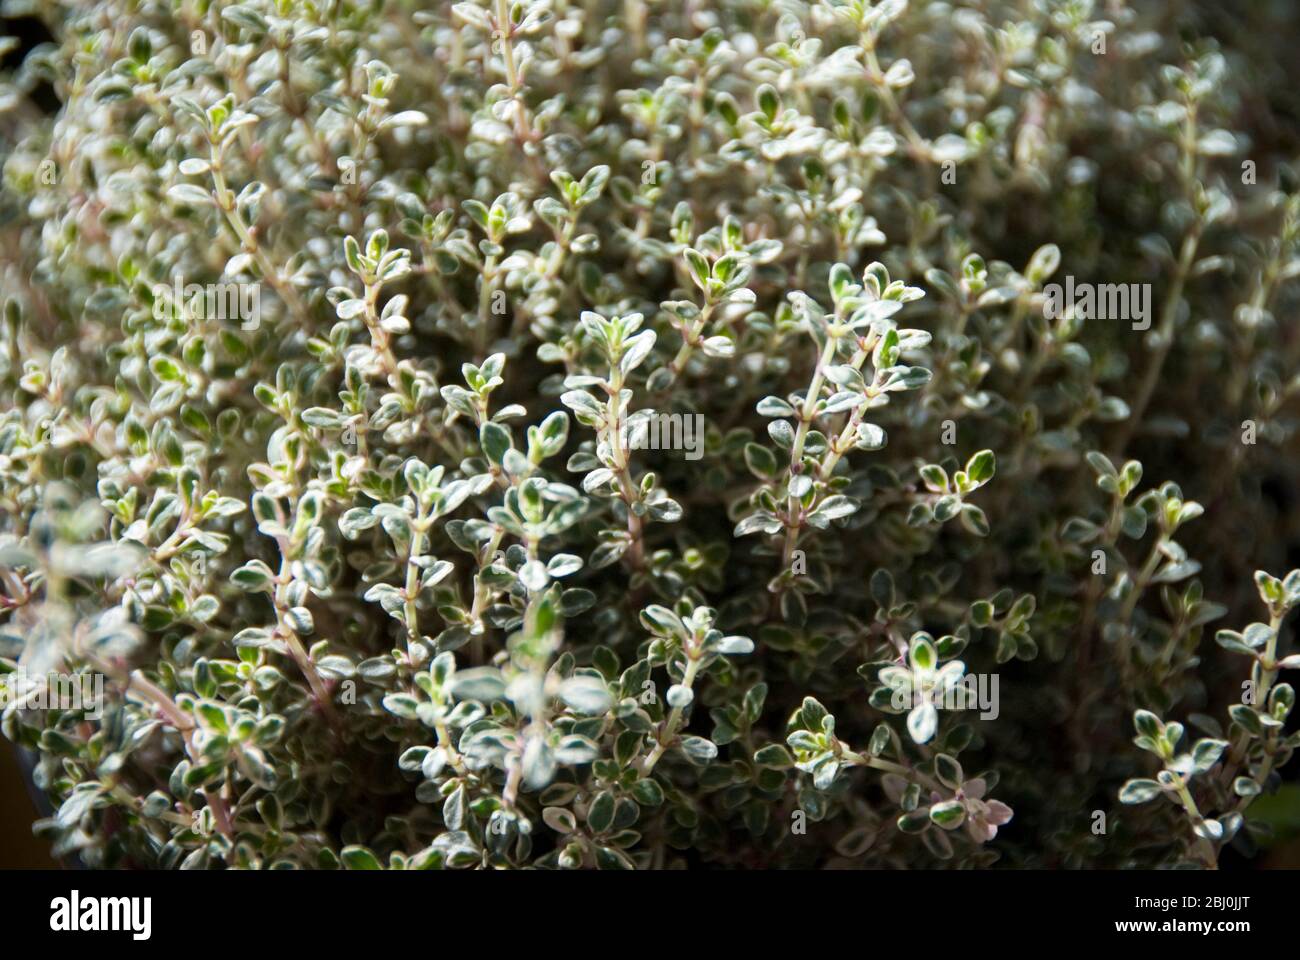 Fresh variegated thyme growing in pot Stock Photo